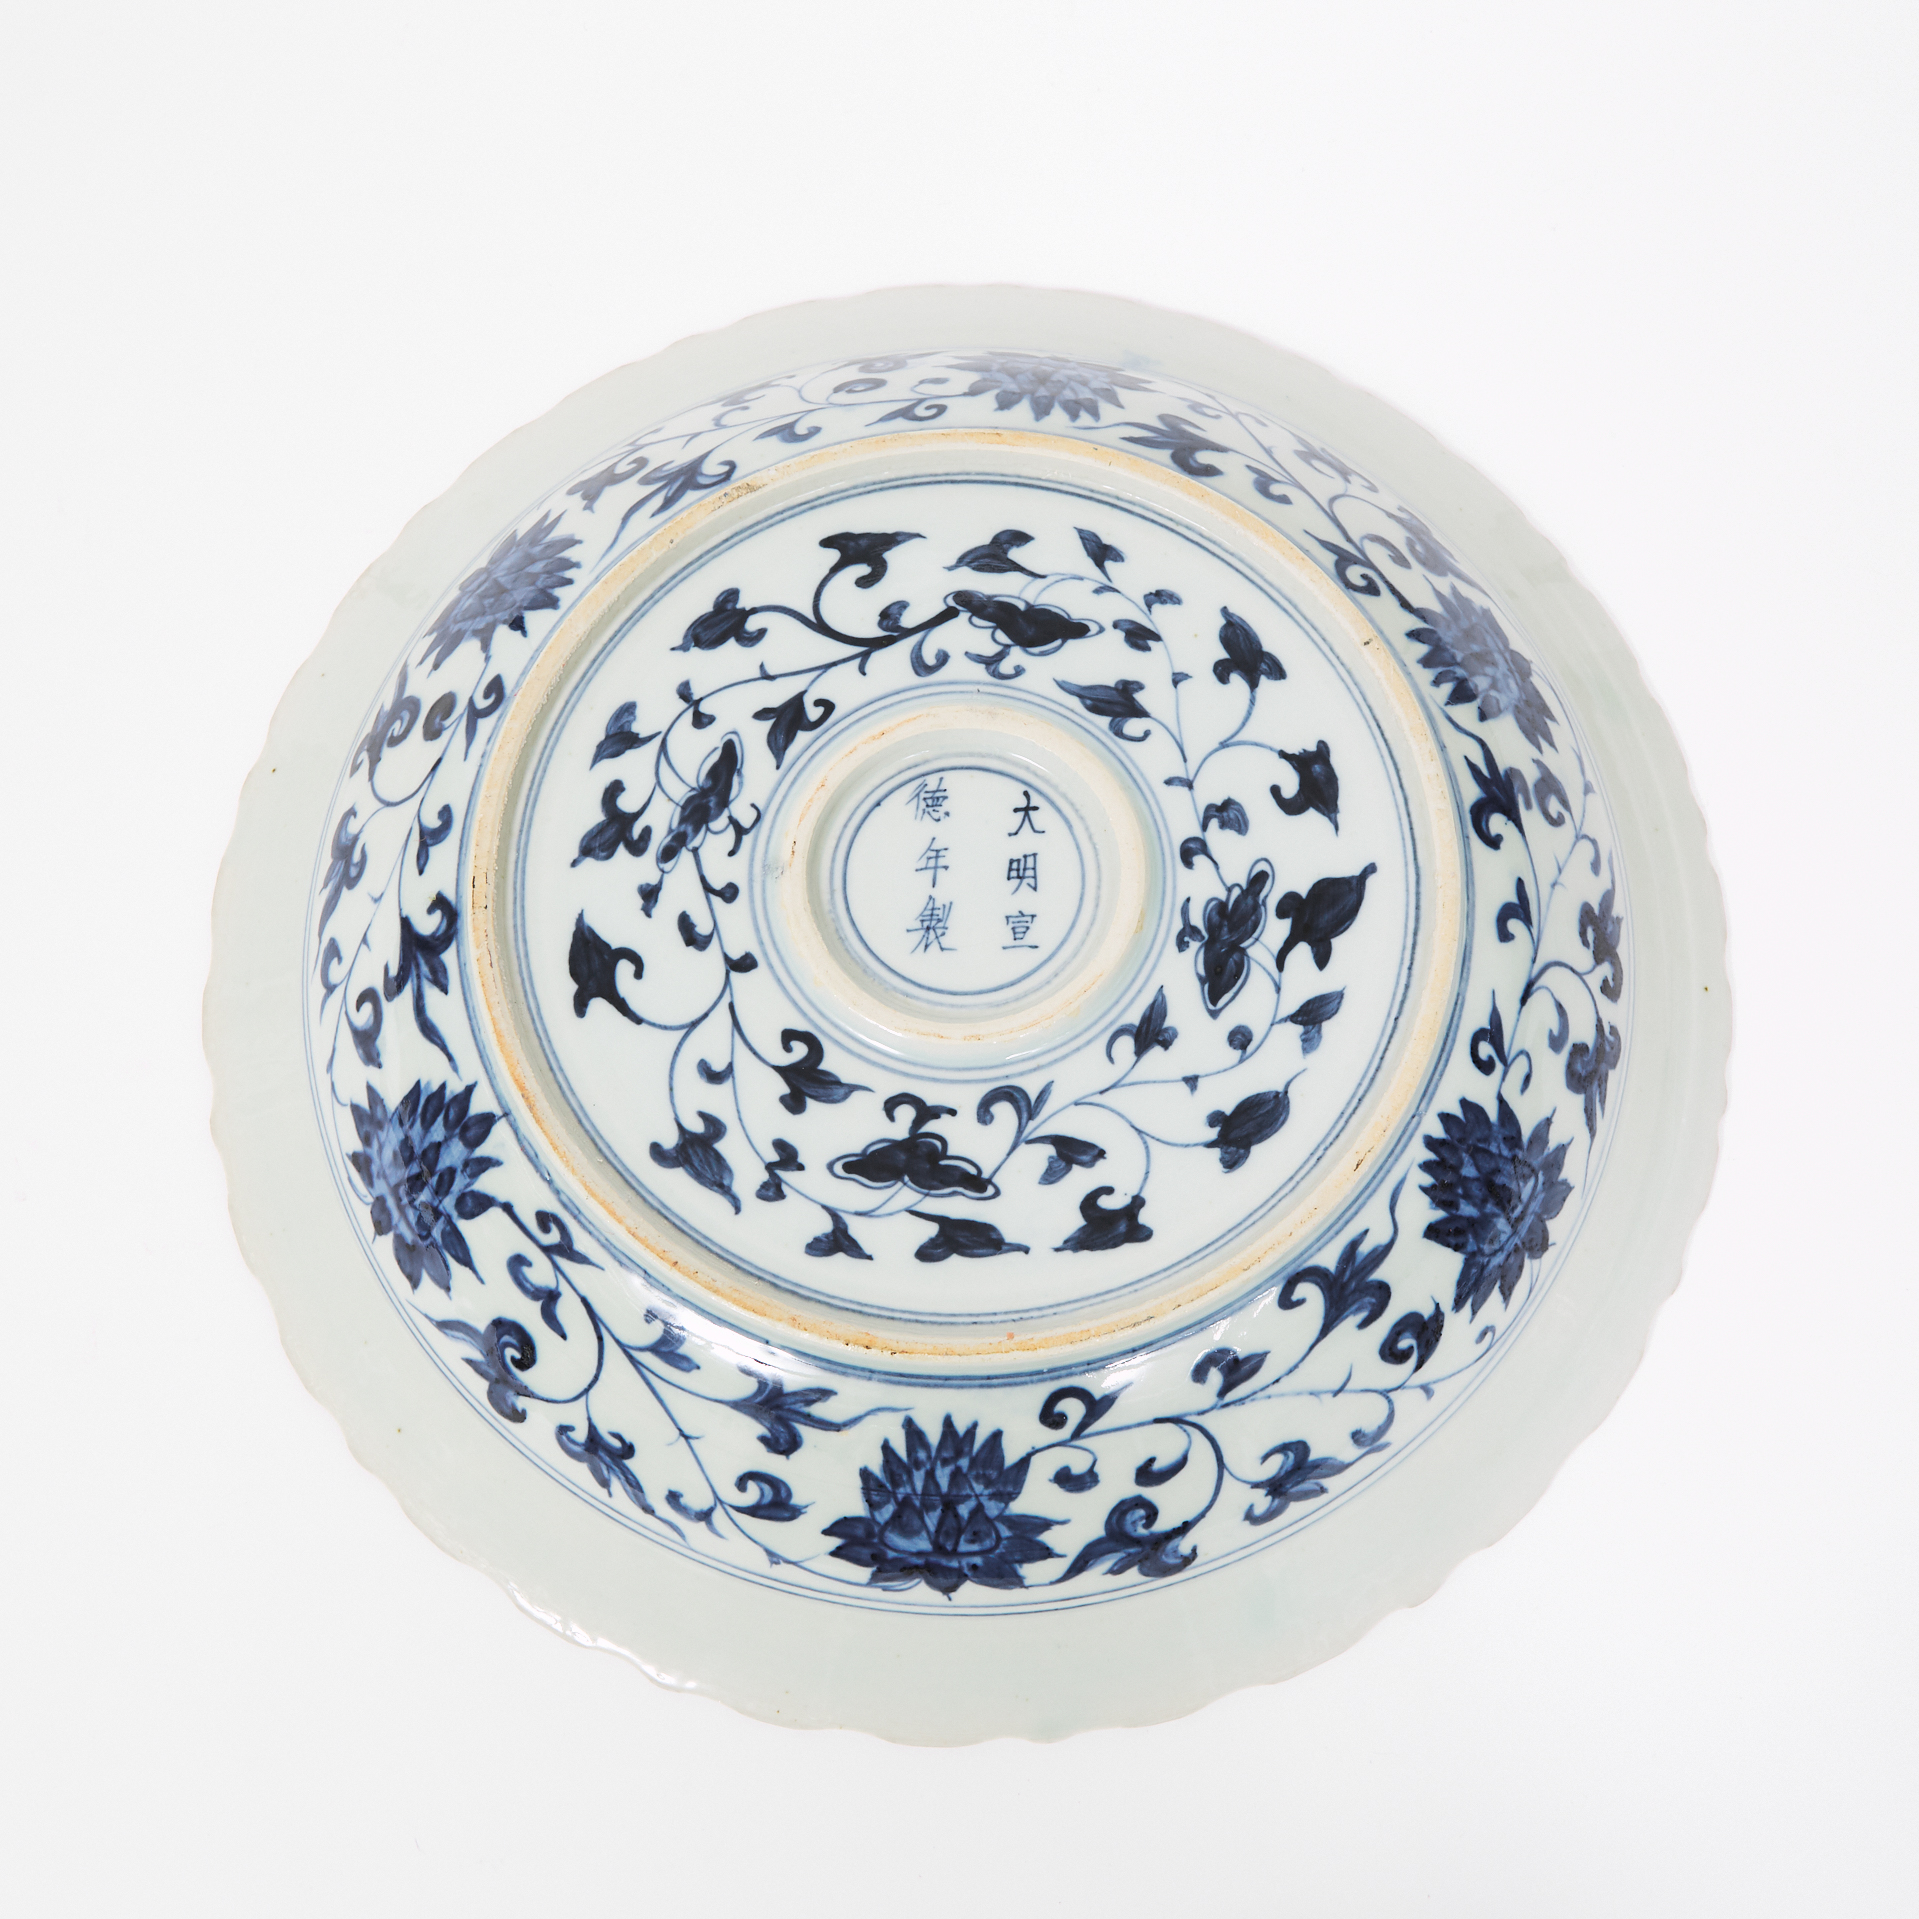 A Massive Blue and White 'Fish' Charger, Xuande Mark, 19th/20th Century